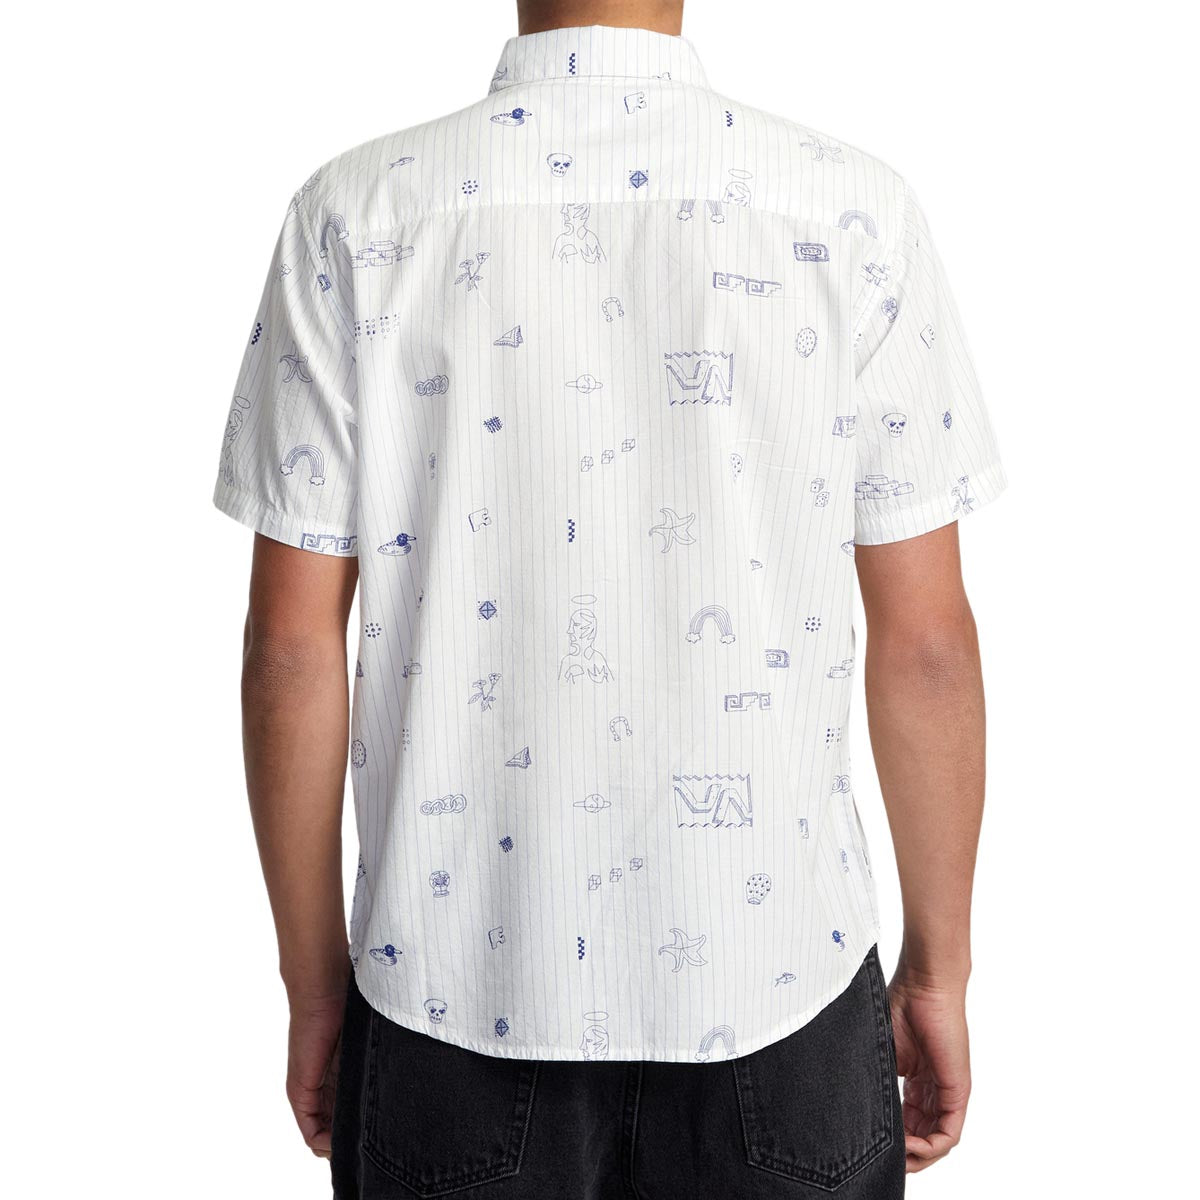 RVCA College Ruled Shirt - Antique White image 2